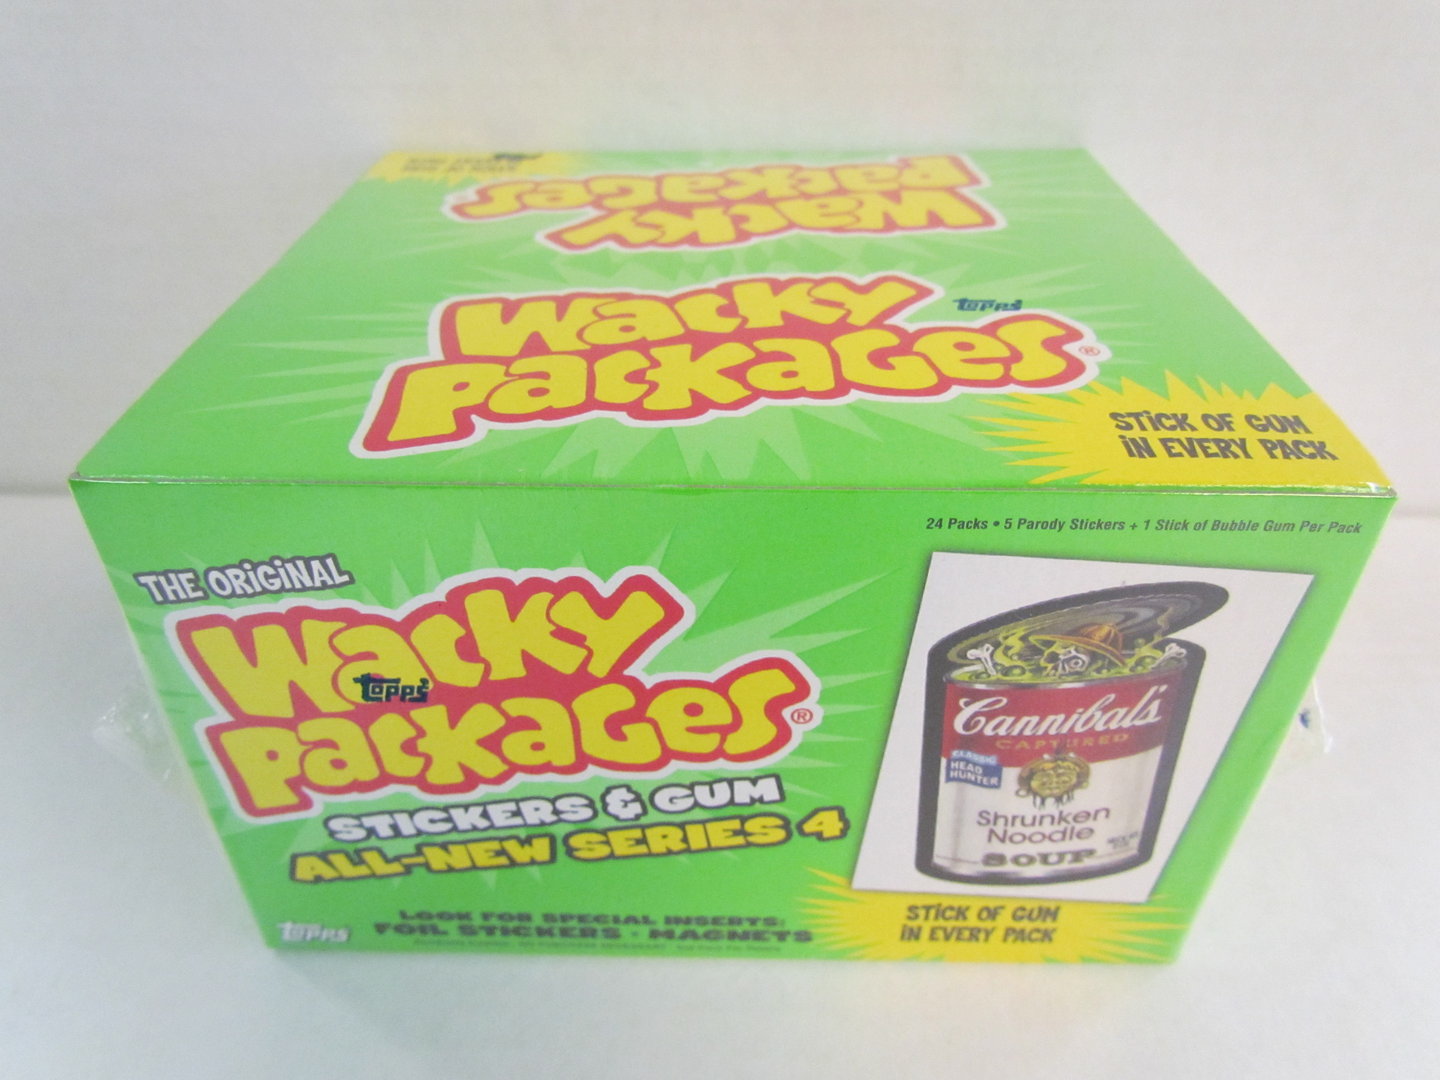 2007 TOPPS WACKY PACKAGES  RETAIL BOX 24 PACKS 